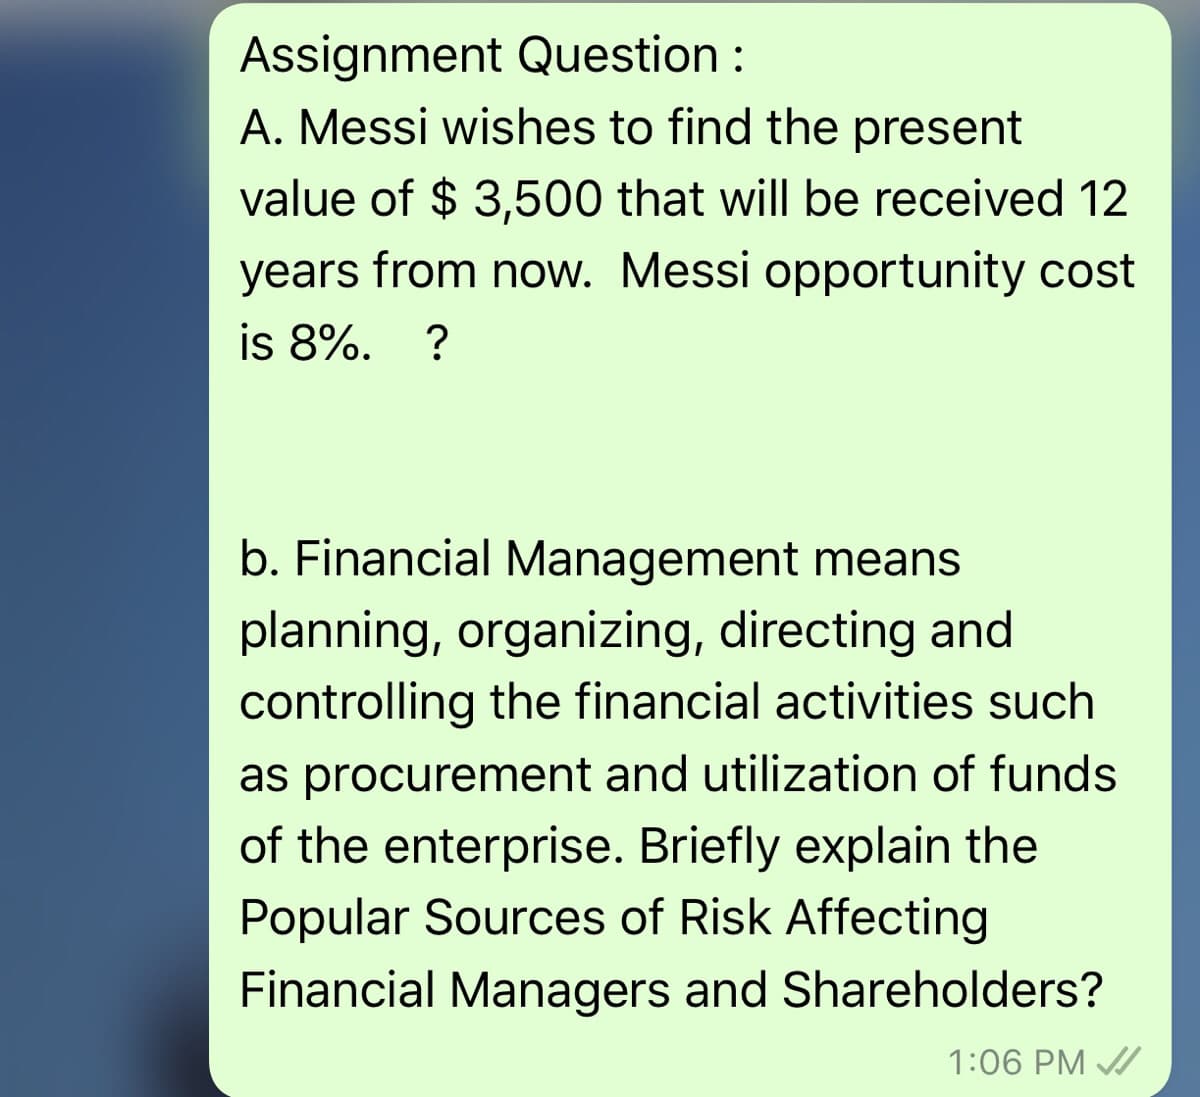 Assignment Question:
A. Messi wishes to find the present
value of $ 3,500 that will be received 12
years from now. Messi opportunity cost
is 8%. ?
b. Financial Management means
planning, organizing, directing and
controlling the financial activities such
as procurement and utilization of funds
of the enterprise. Briefly explain the
Popular Sources of Risk Affecting
Financial Managers and Shareholders?
1:06 PM A
